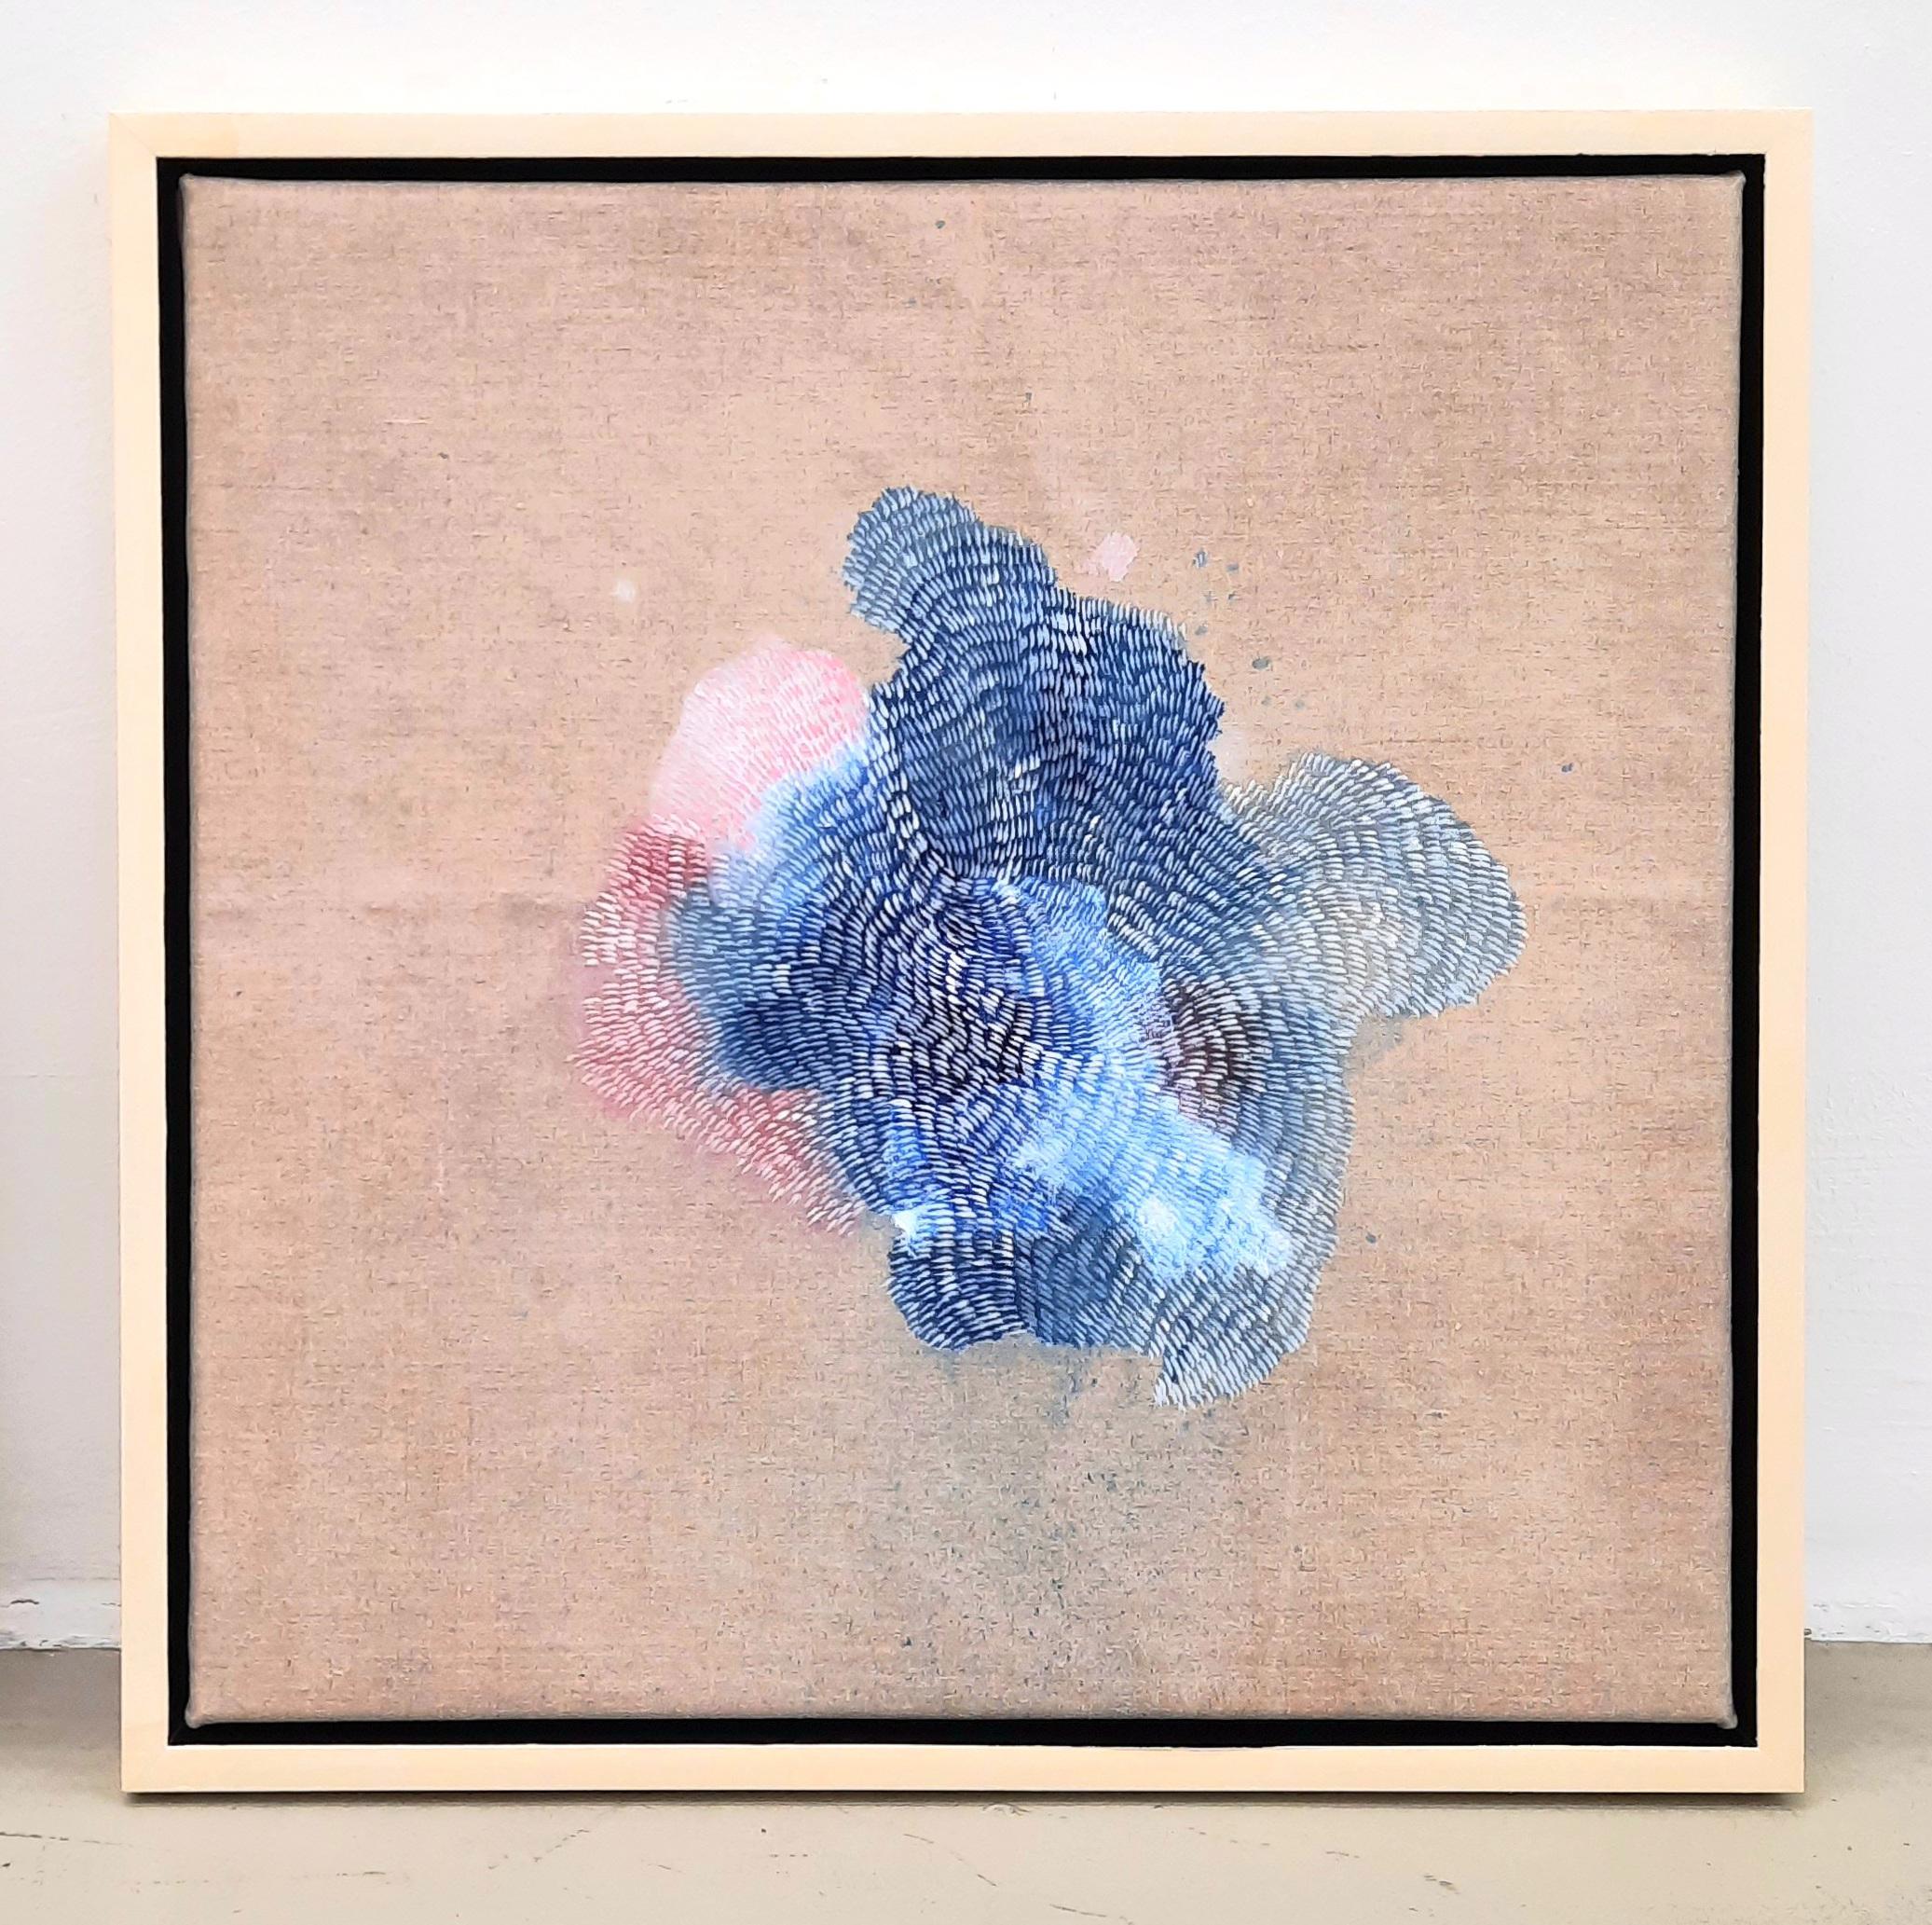 Kenji Lim
Islands of Spray 6 - Contemporary Abstract Blue and Pink Landscape Painting
Acrylic on linen, framed
54 cm x 54 cm
Unique copy

Kenji Lim is a British artist based in Essex, born 1980 in Singapore. He works through sculpture, video,